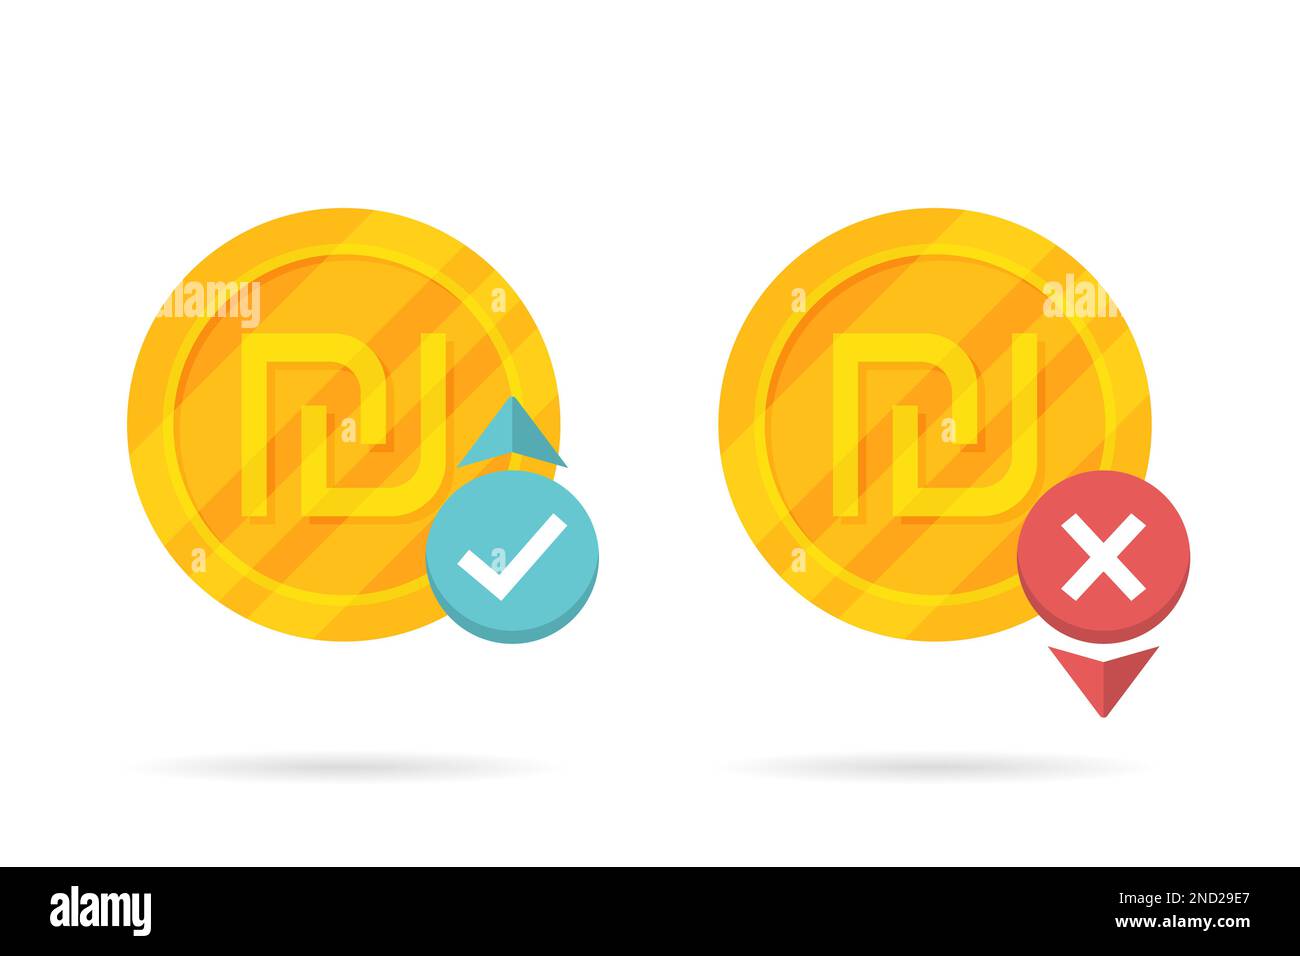 Up and down shekel money icon with shadow Stock Vector